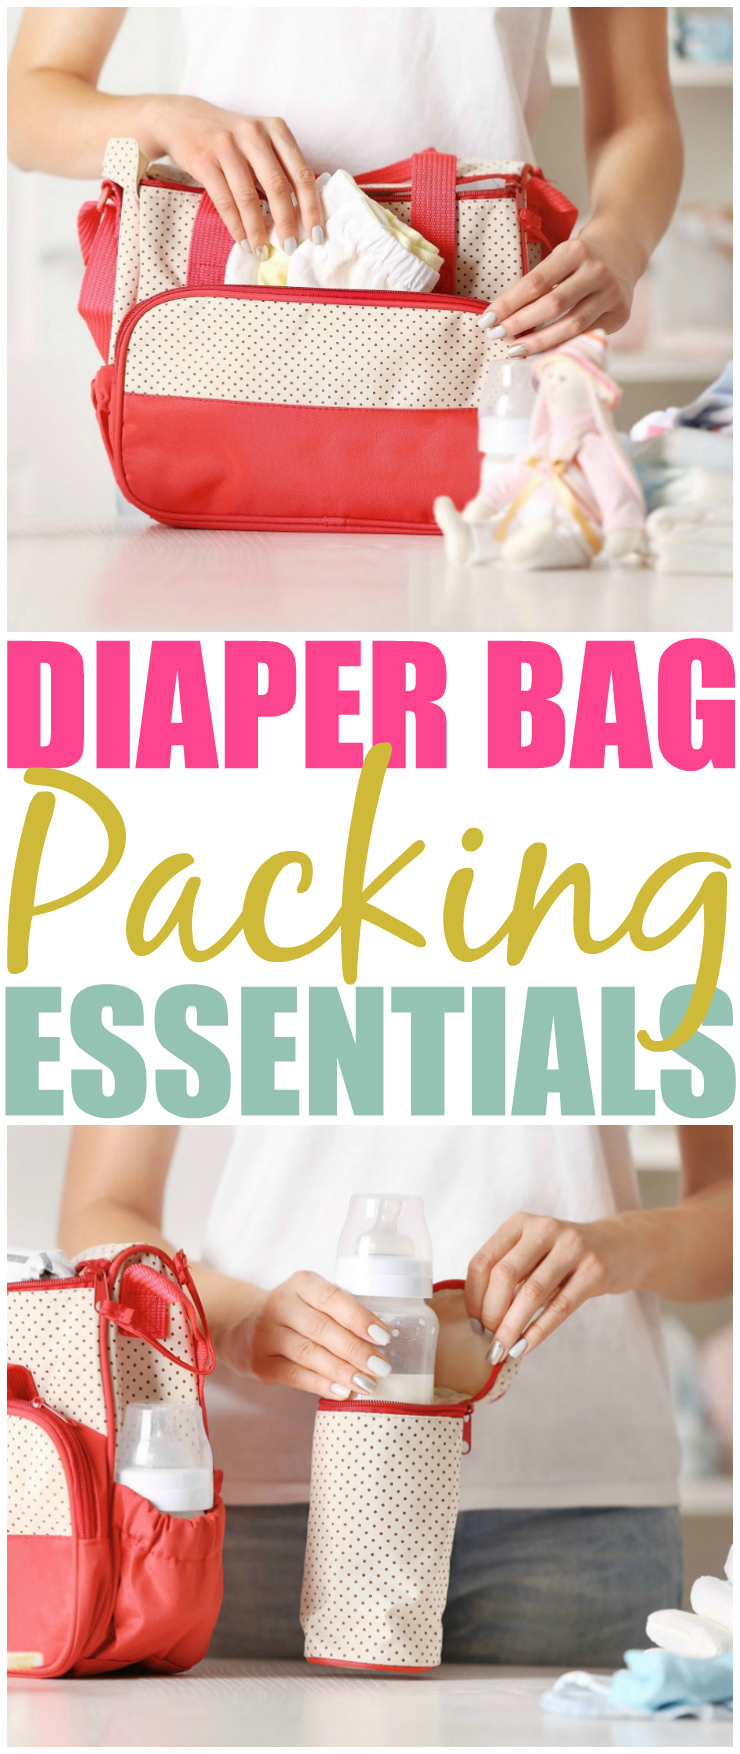 Don't Leave The House Without Packing These Diaper Bag Essentials